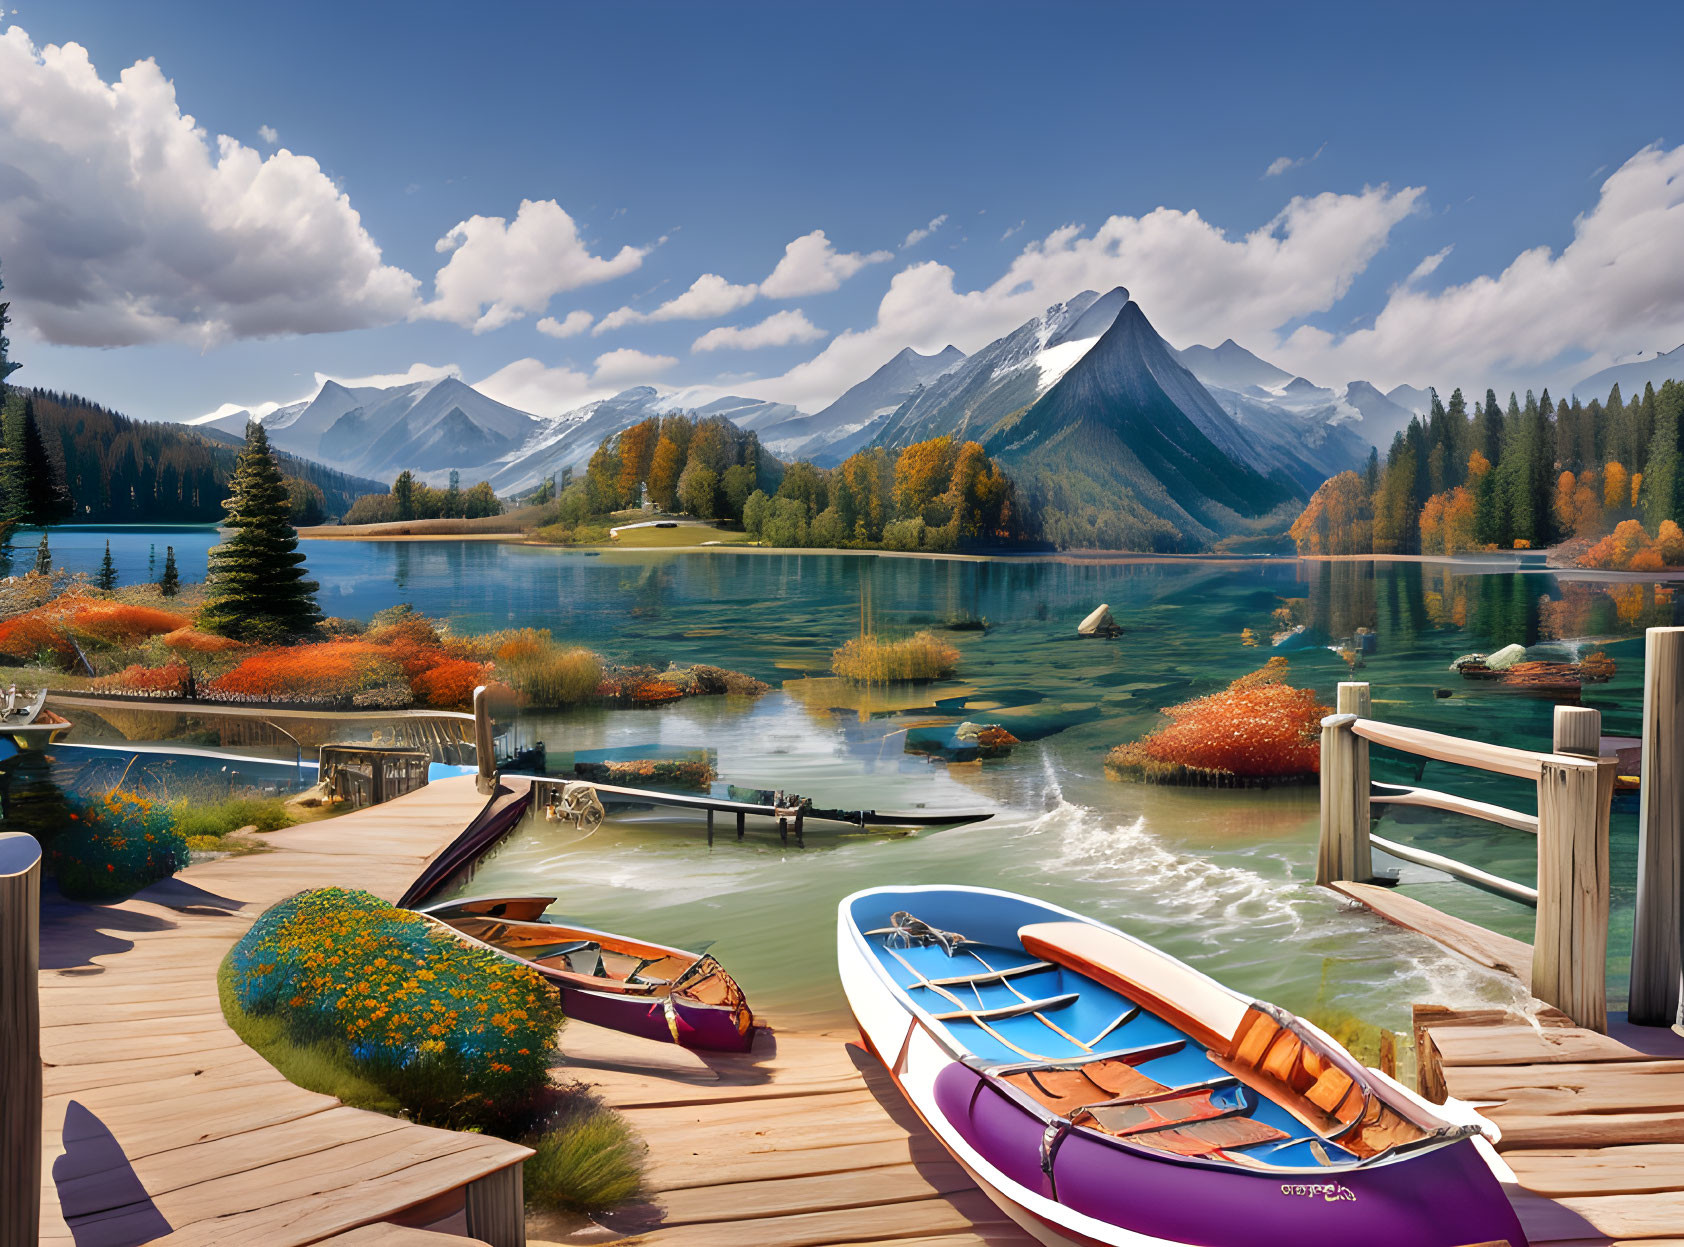 Tranquil mountain lake scene with colorful canoes on wooden dock